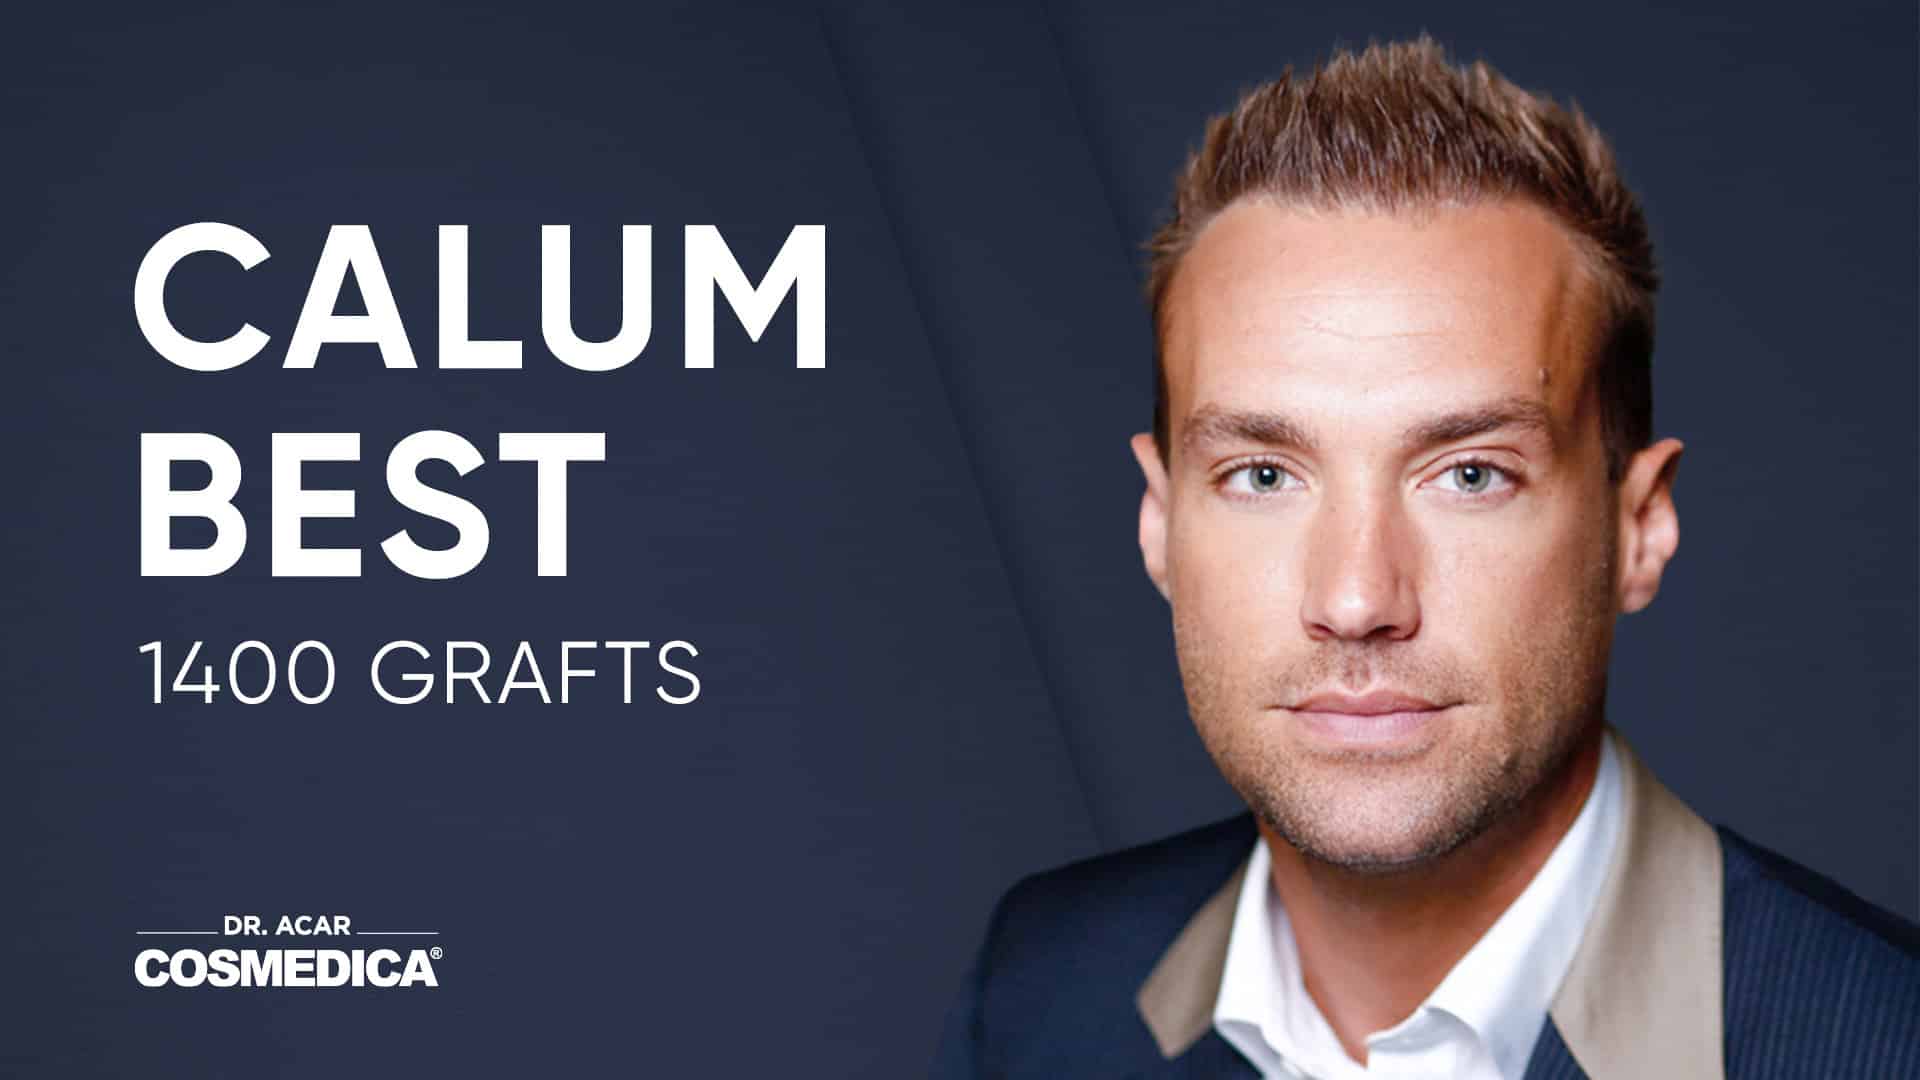 Calum Best did visit Cosmedica Clinic - Dr. Acar to have his hair transplant done in Turkey.